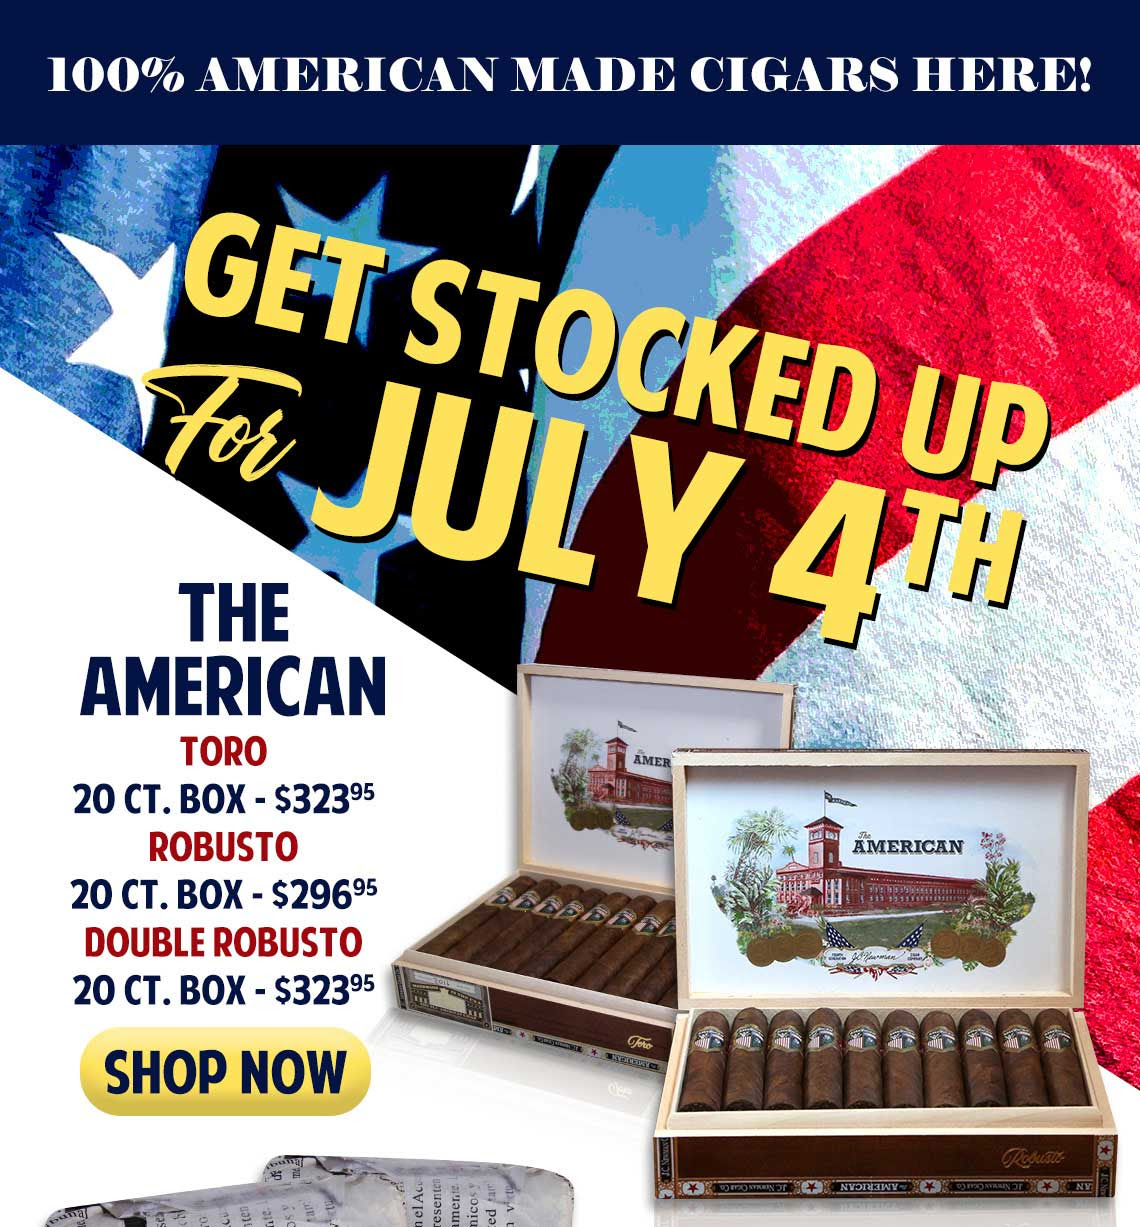 The American Cigars